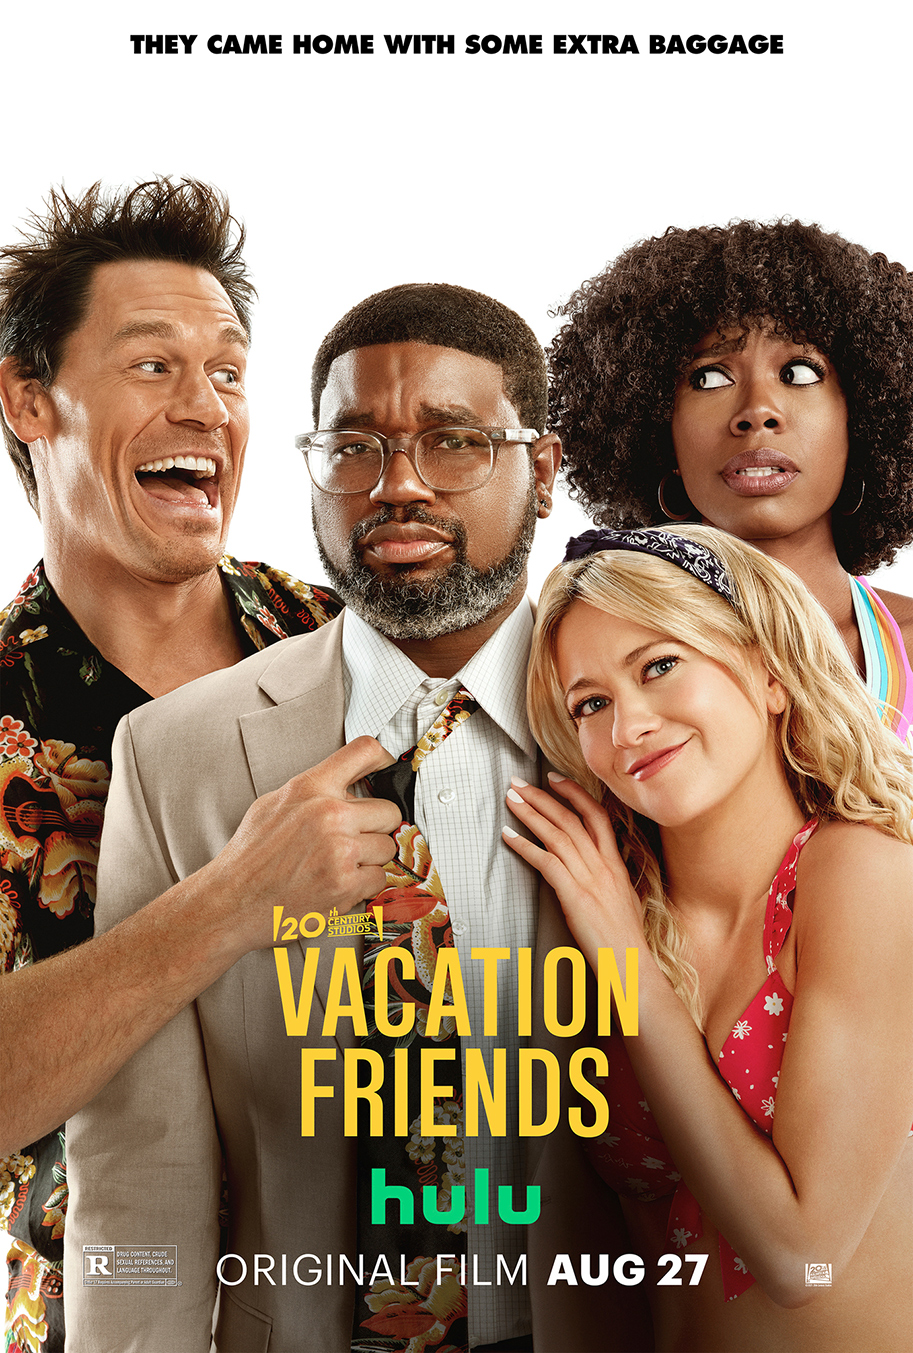 Vacation Friends trailer, poster